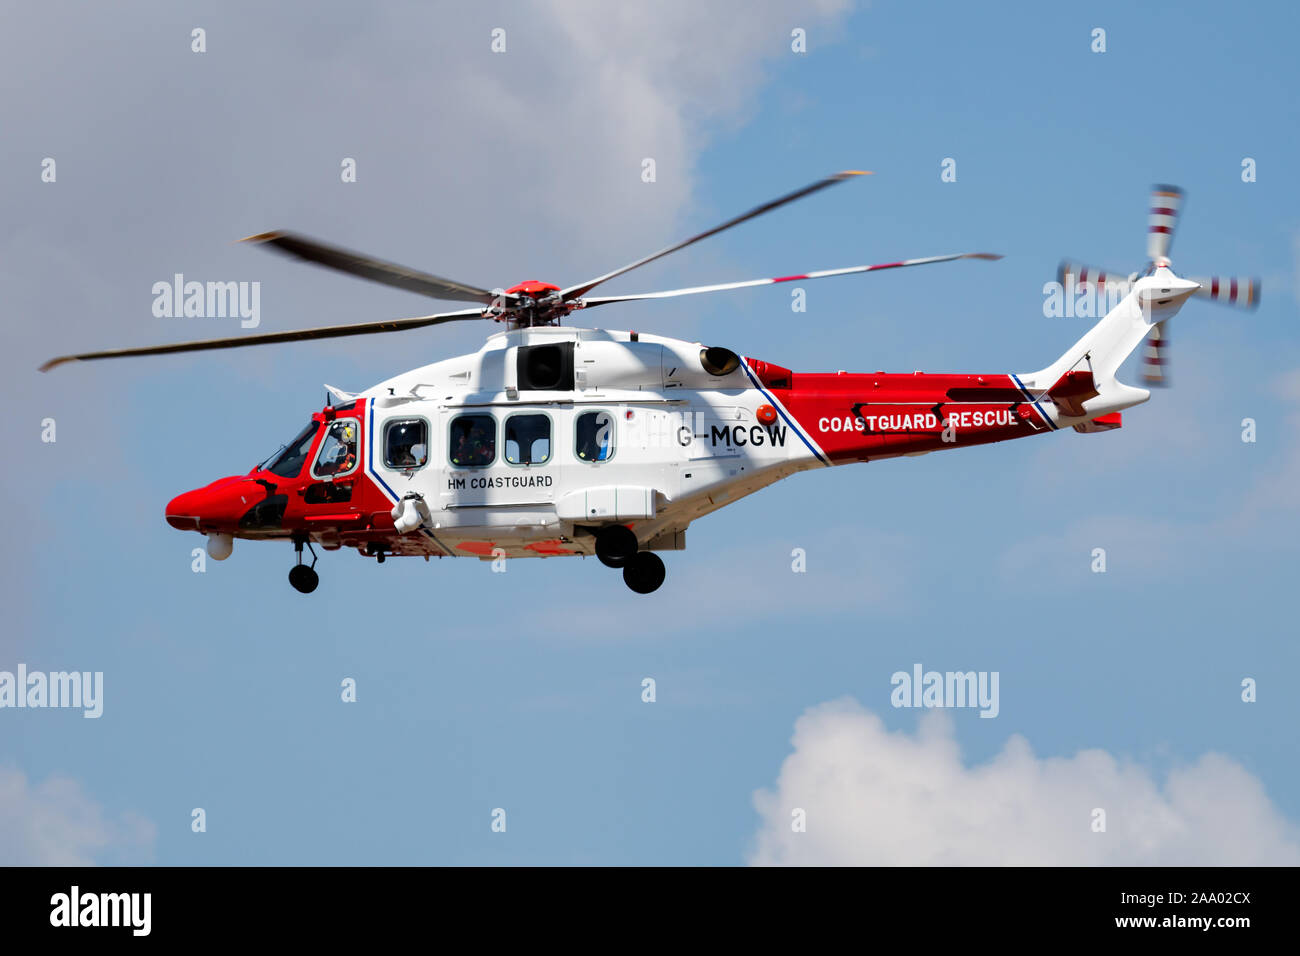 FAIRFORD / UNITED KINGDOM - JULY 12, 2018: HM Coastguard AgustaWestland AW-189 G-MCGW search and rescue helicopter arrival and landing for RIAT Royal Stock Photo